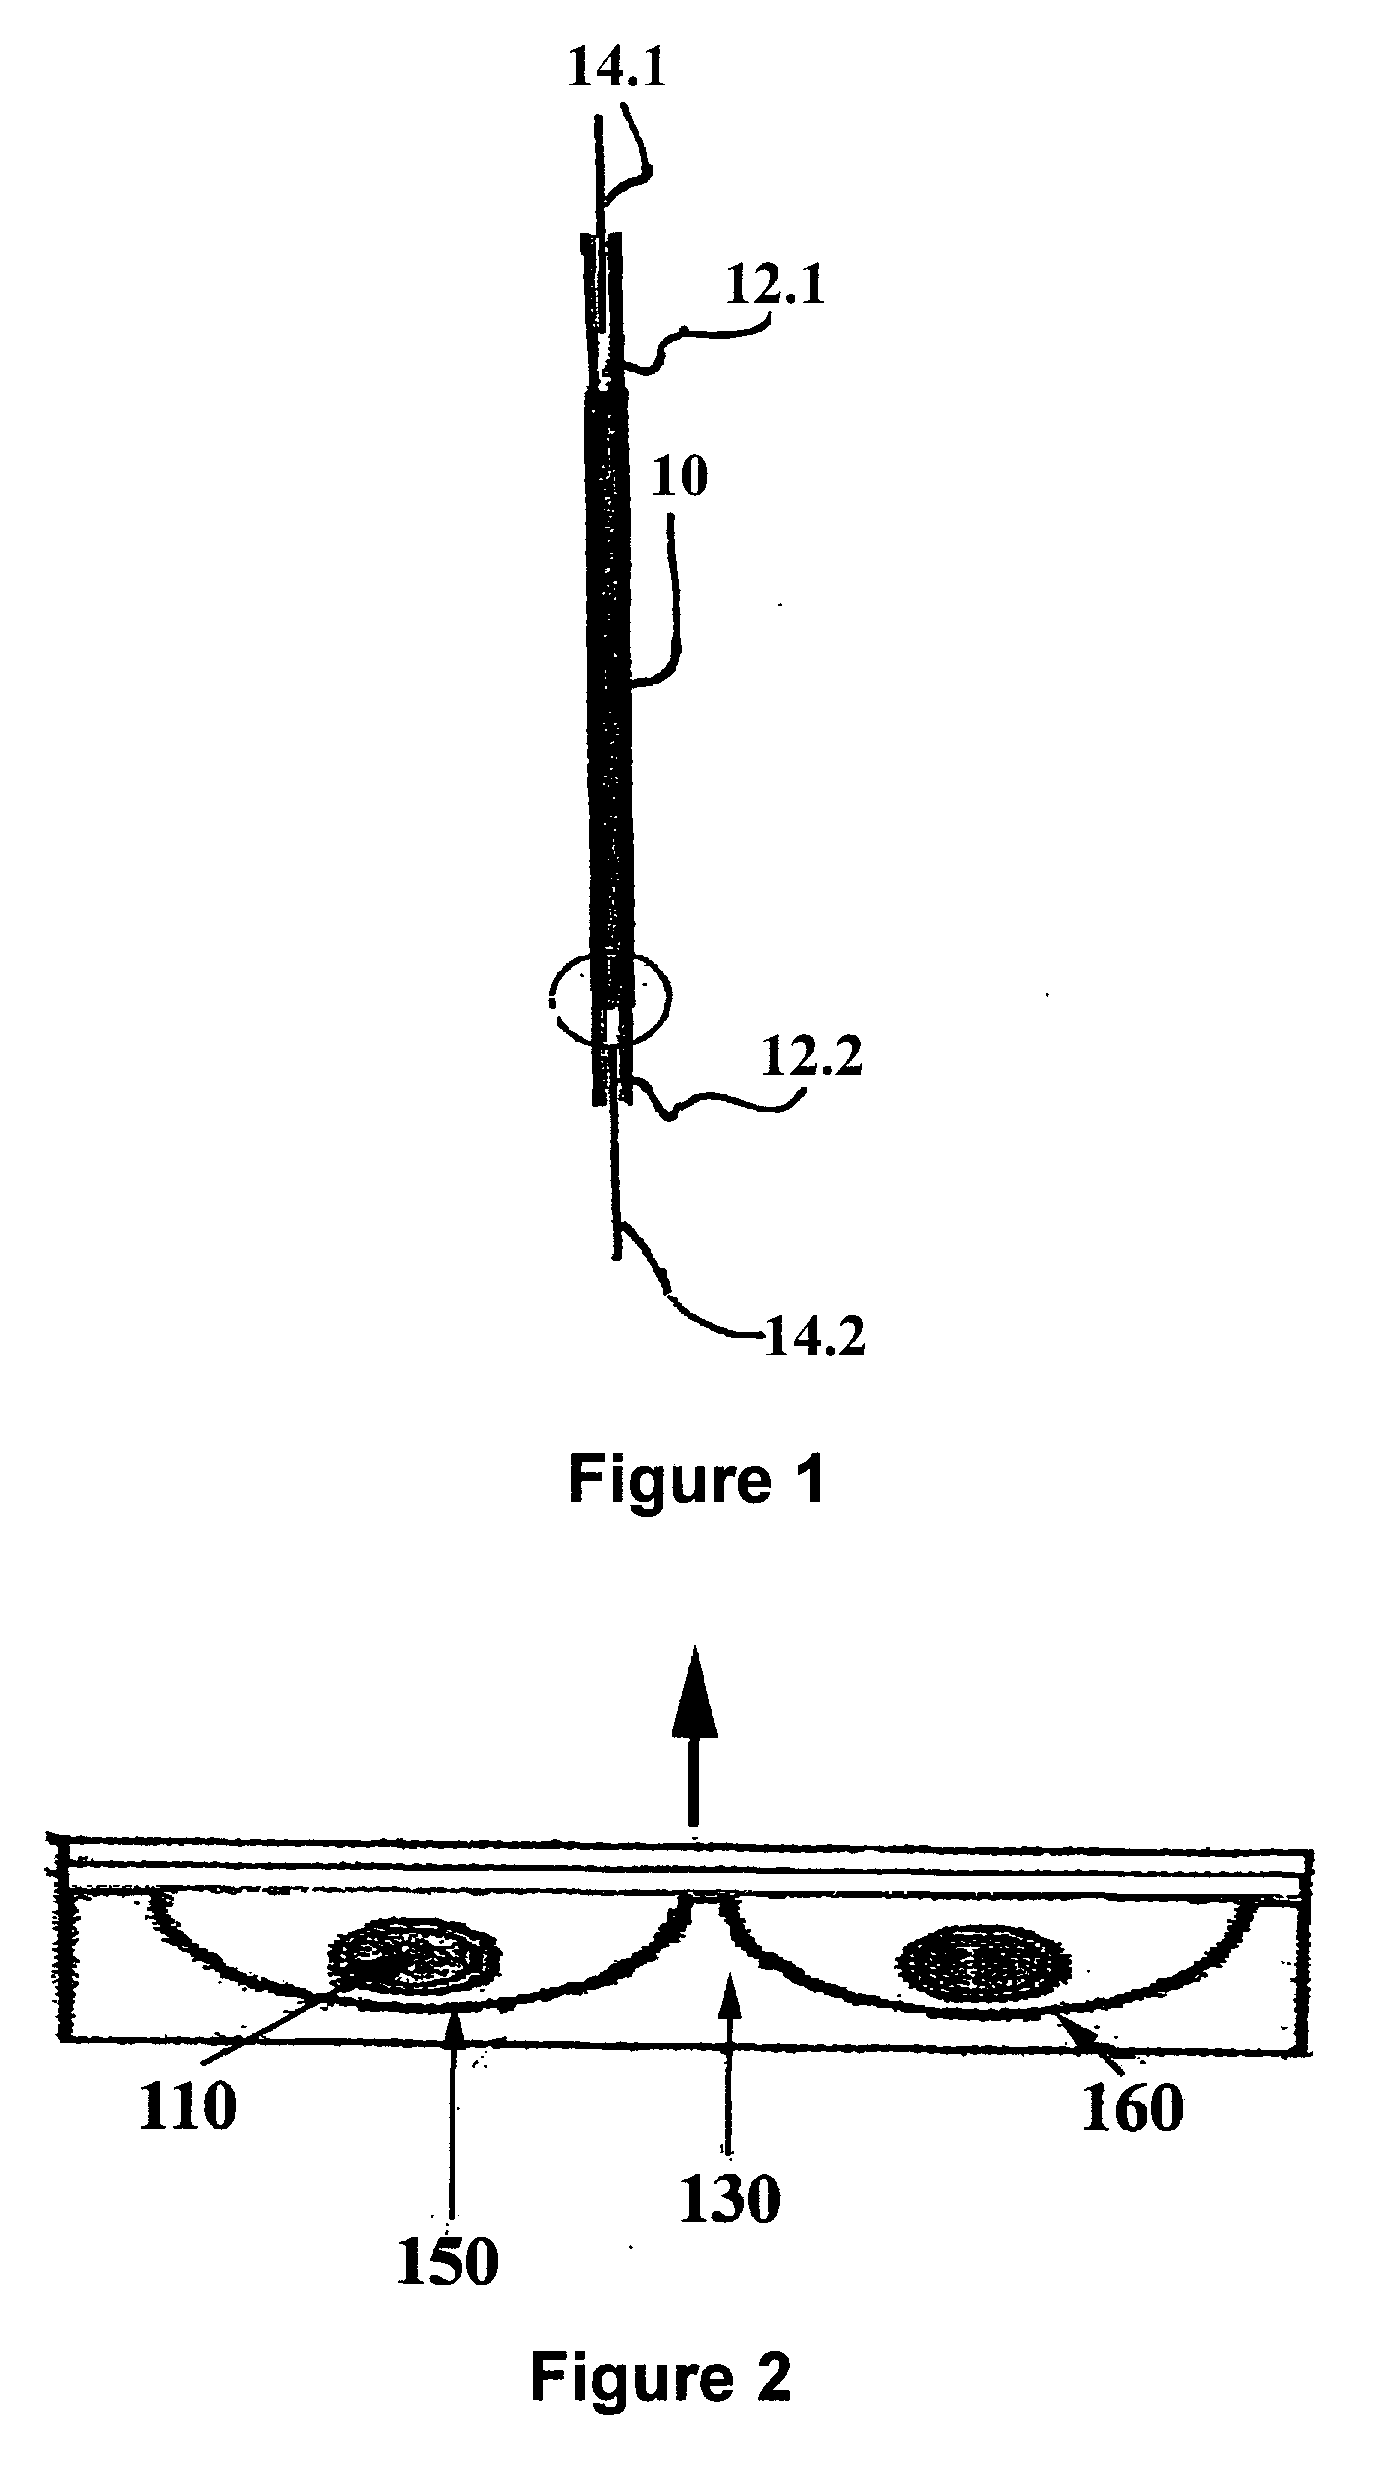 Backlight system with ir absorption properties